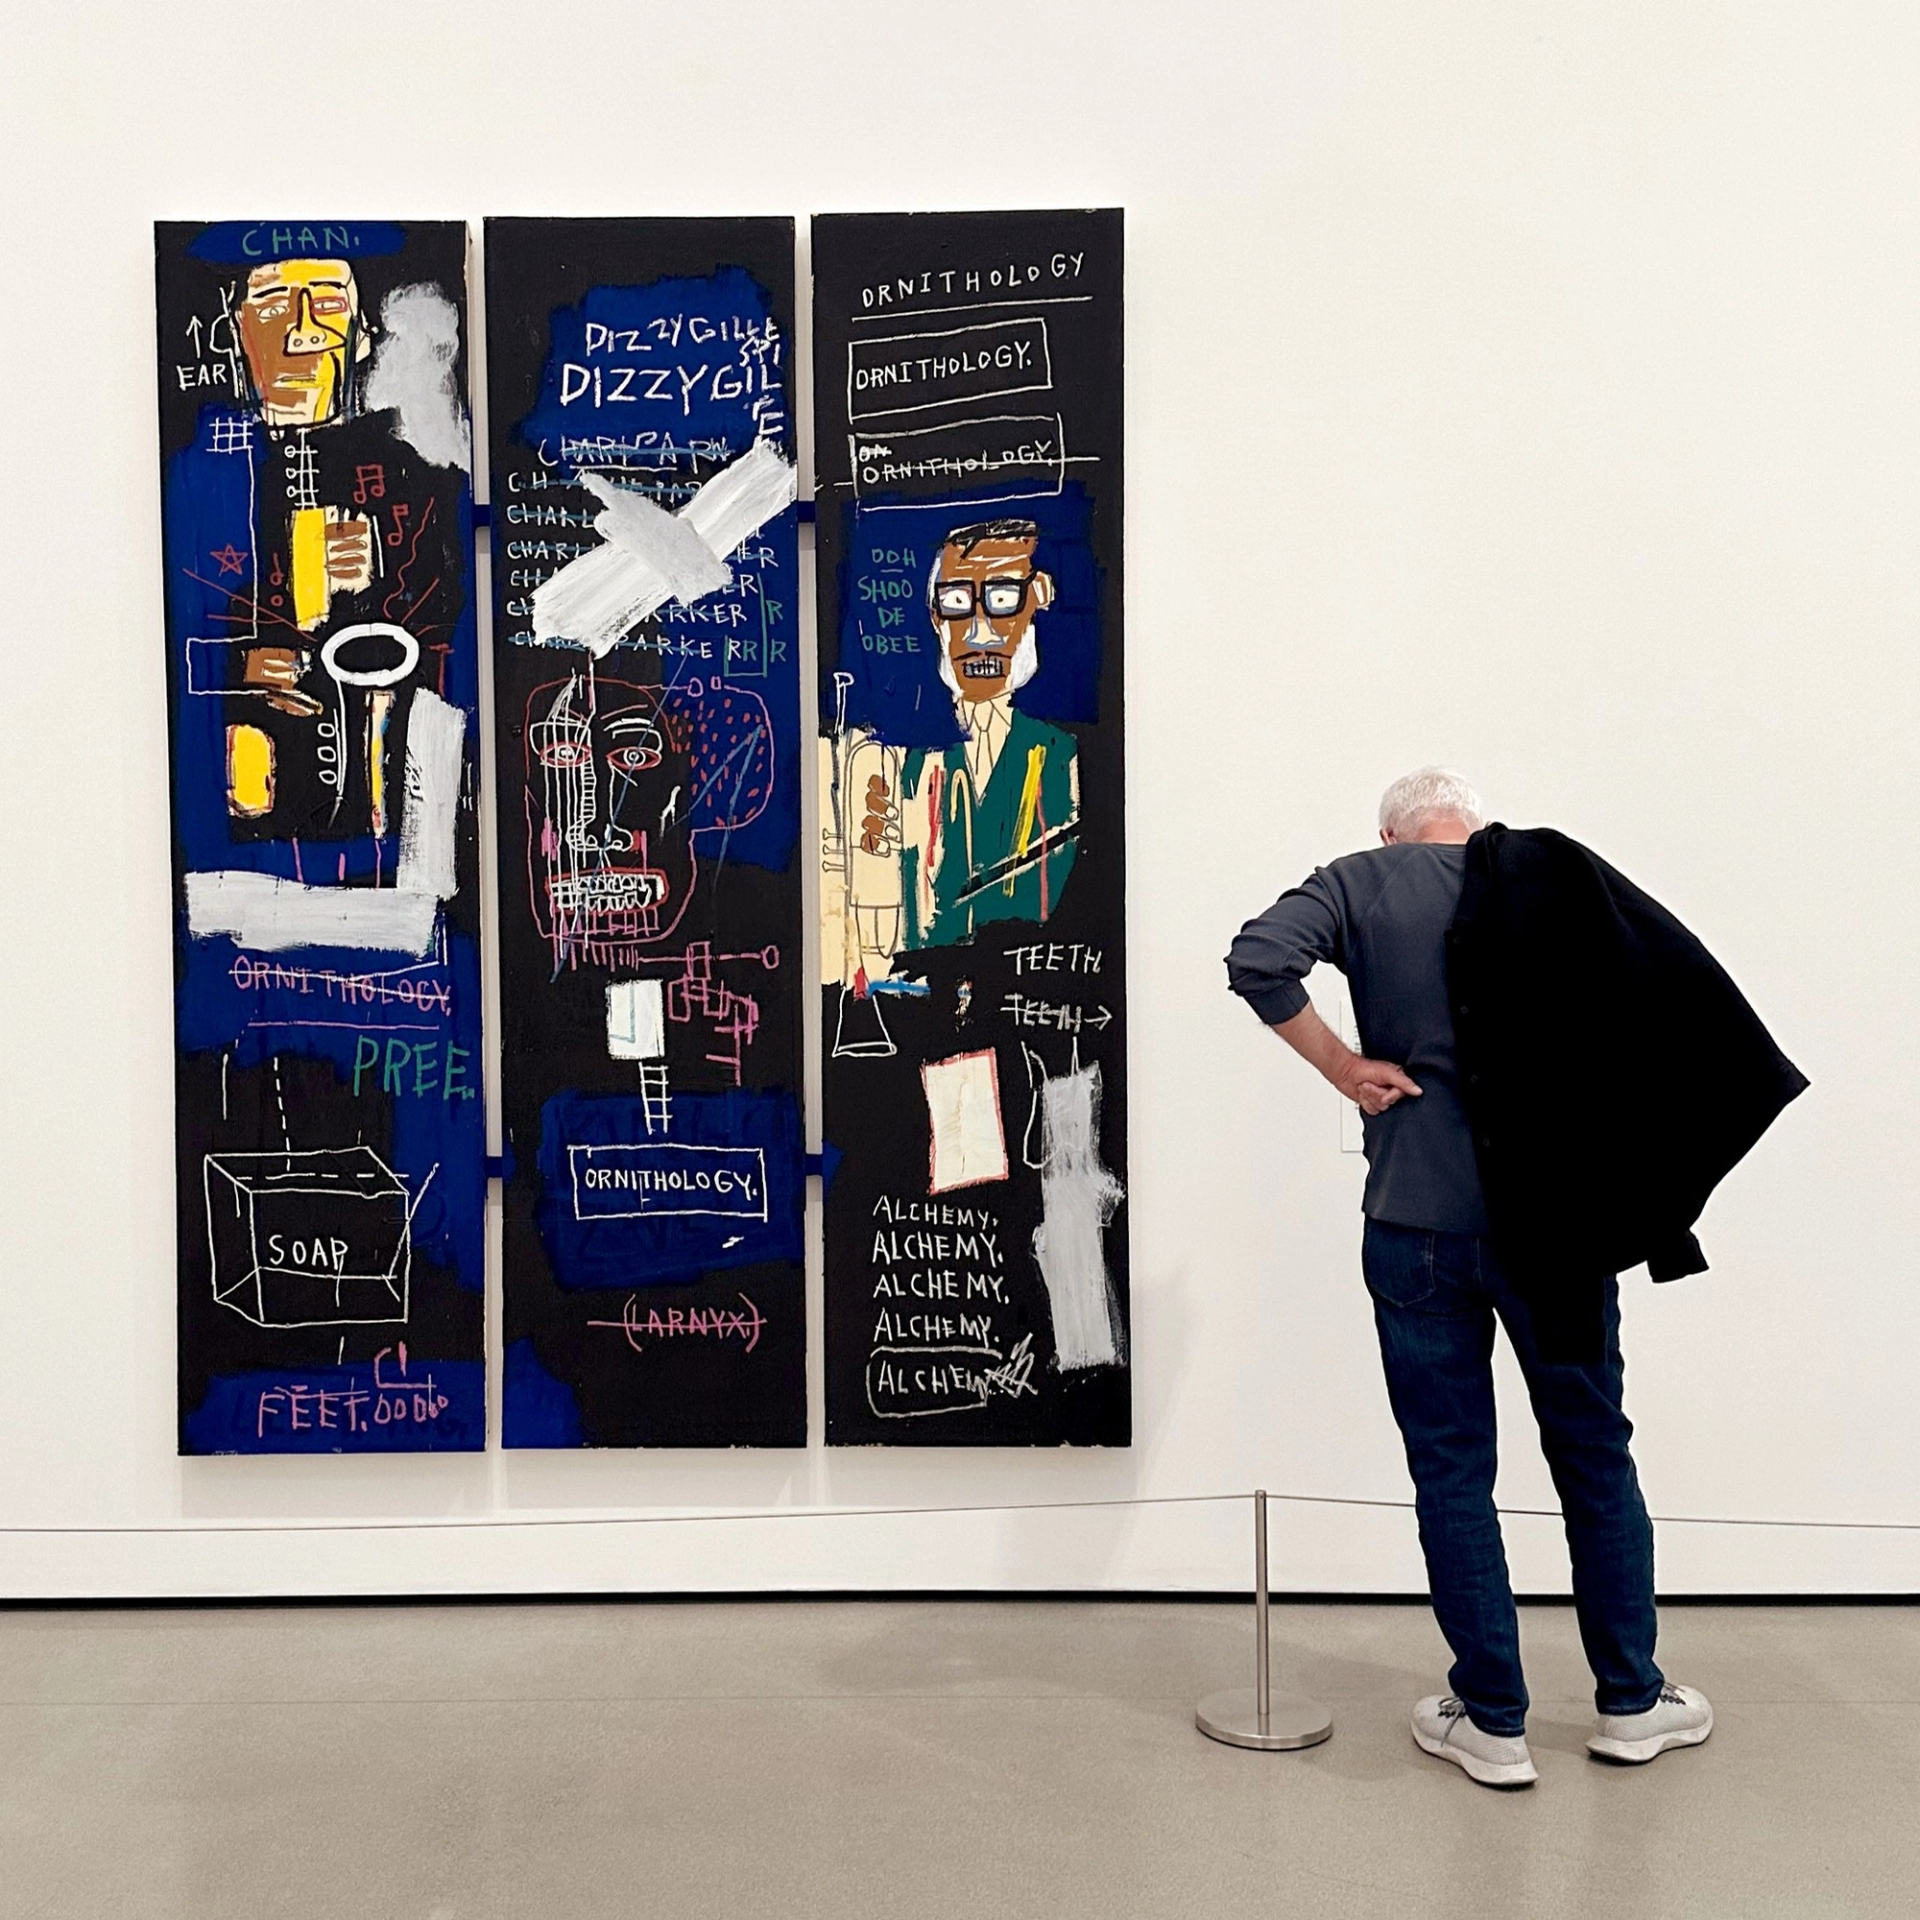 This painting by Basquiat is an homage to the great horn players Charlie Parker and Dizzy Gillespie. On the left is Parker with his alto saxophone and on the right is Gillespie with his trumpet. 